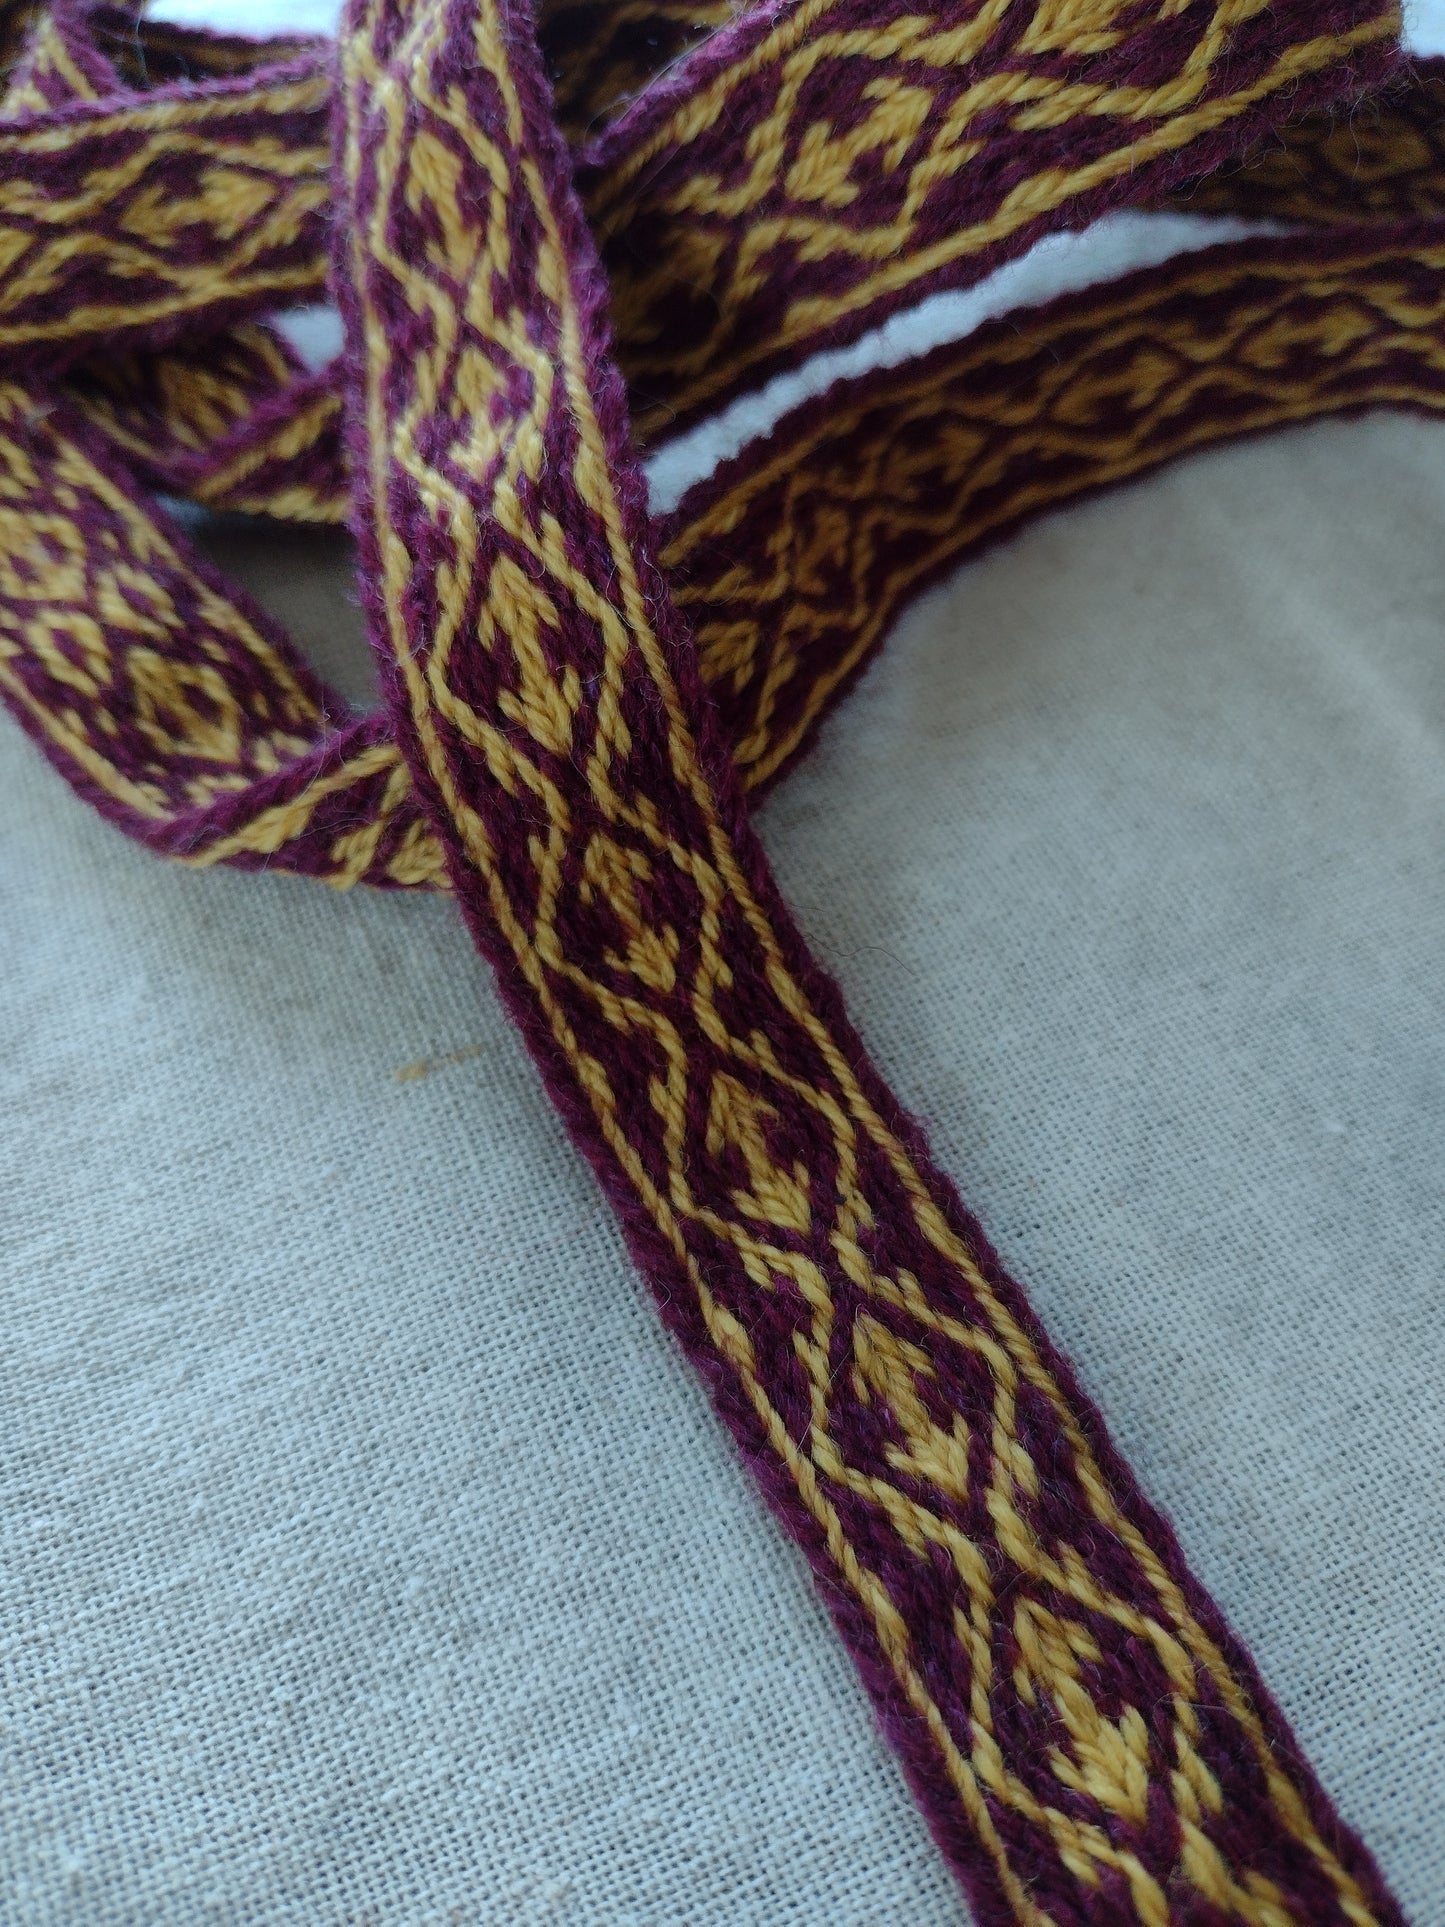 Band with striking pattern in vibrant purple